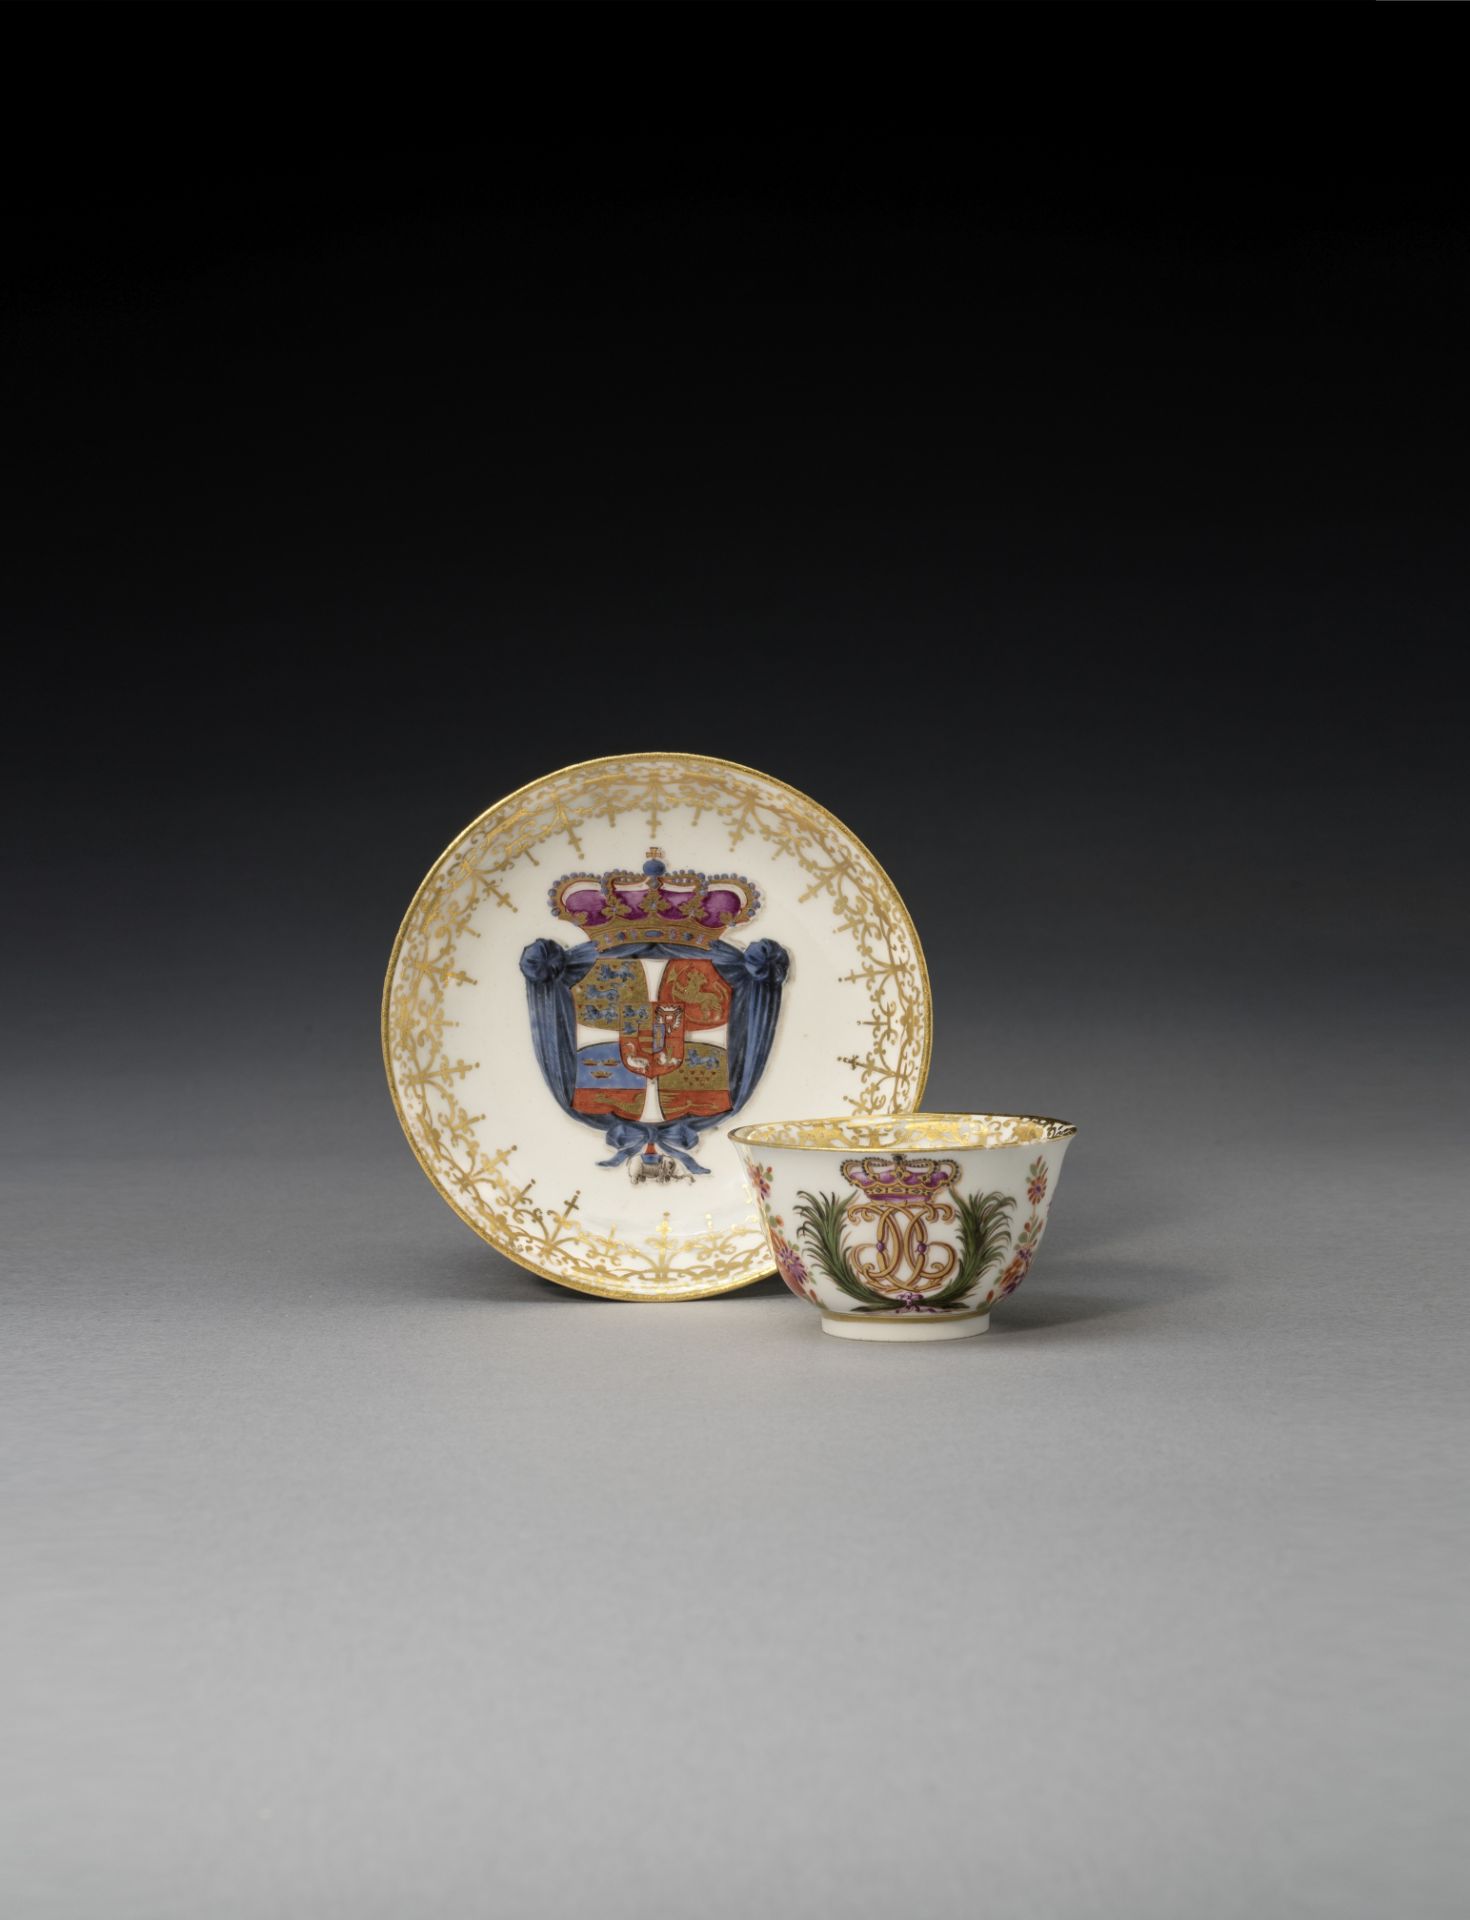 A Meissen armorial teabowl and saucer from the service for Christian VI of Denmark, circa 1730-35